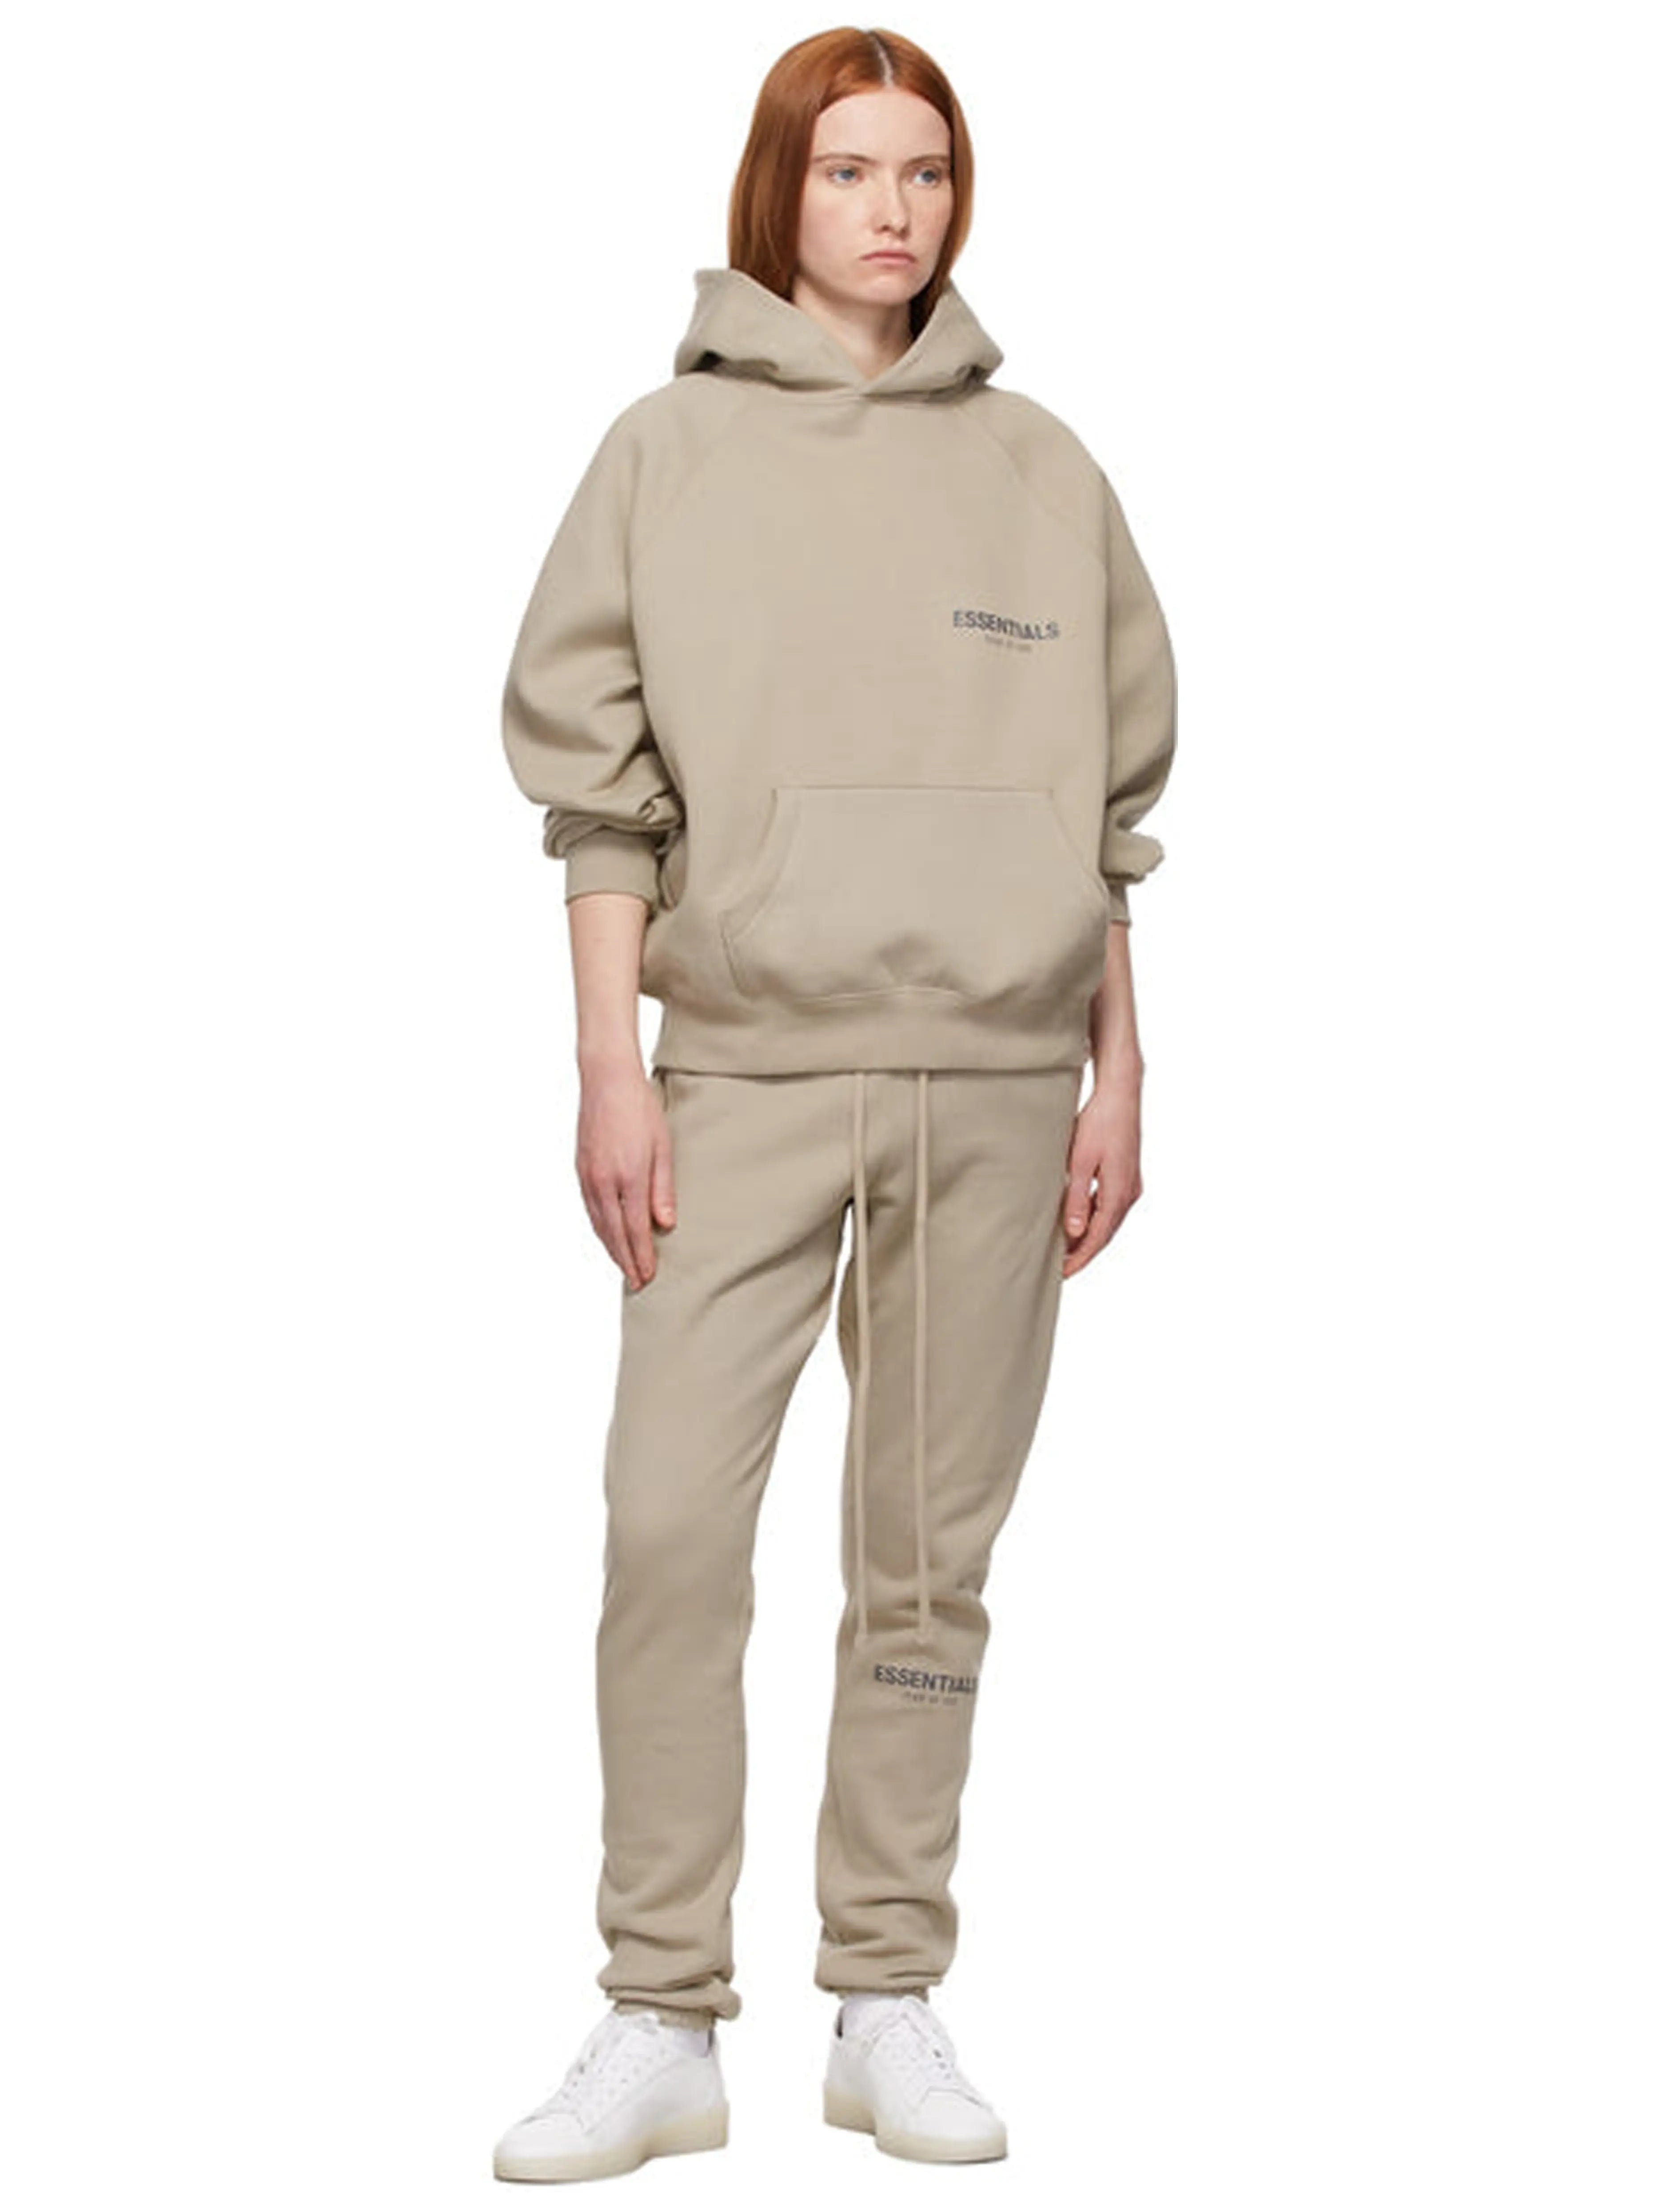 THE FEAR OF GOD ESSENTIALS CORE COLLECTION